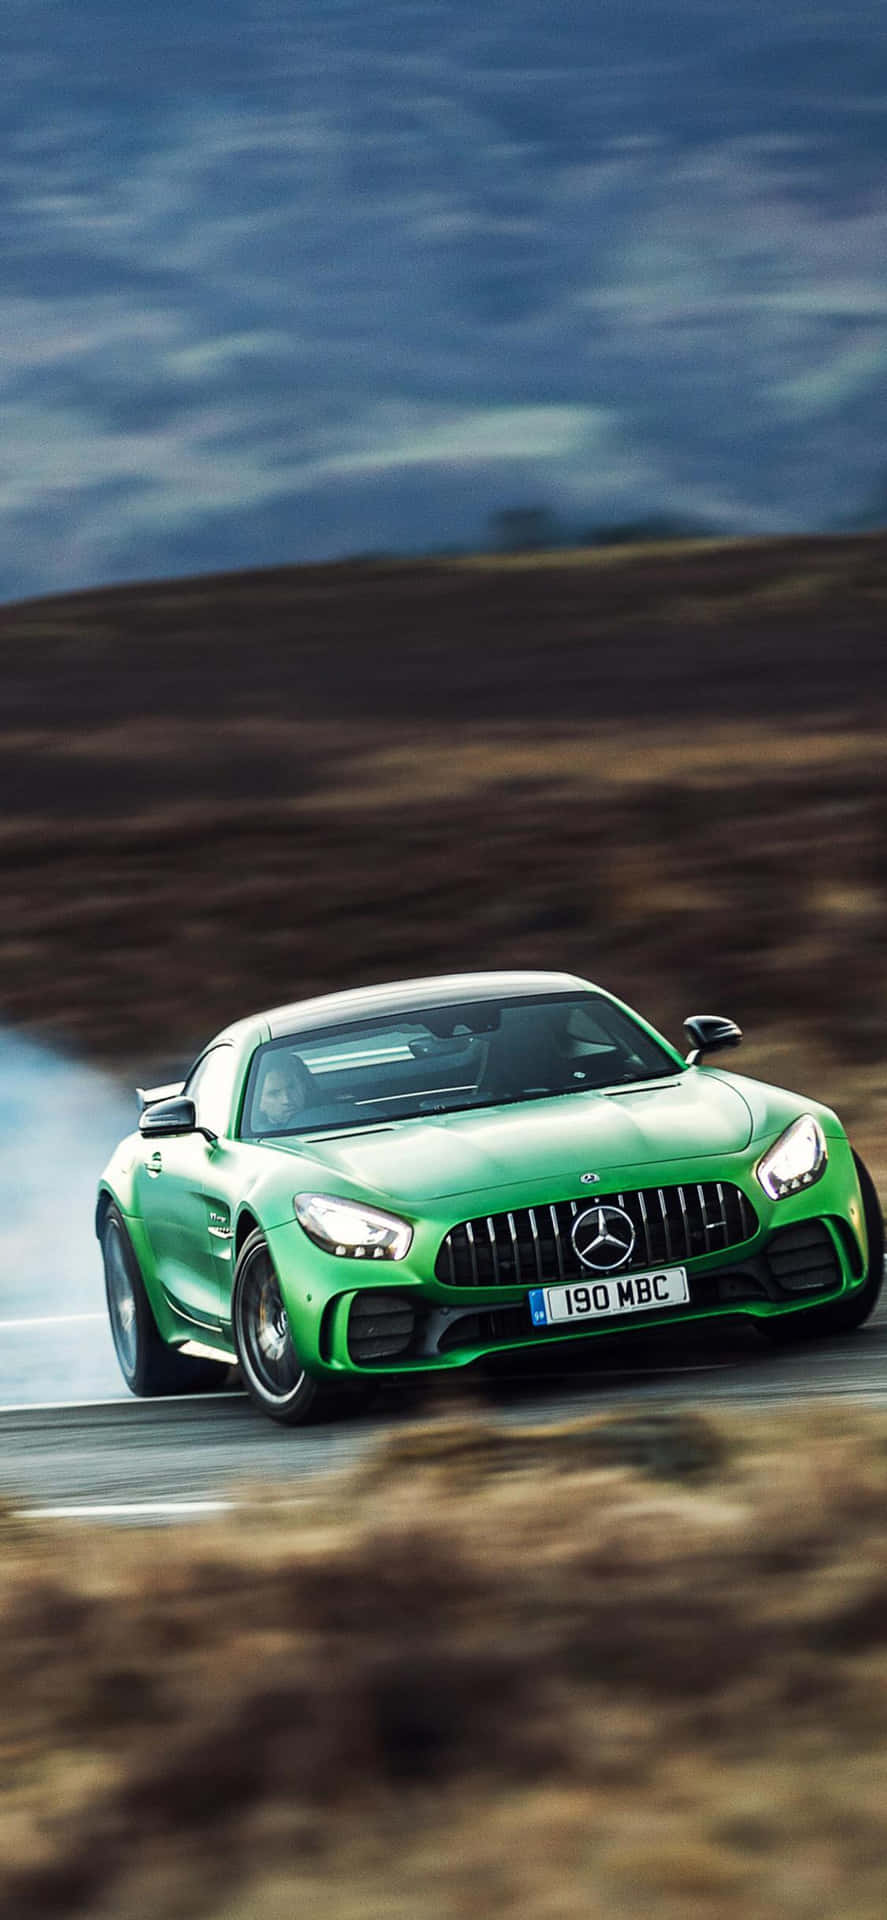 Get Ready To Experience An Ultimate Luxury Ride With Mercedes Benz Iphone Wallpaper